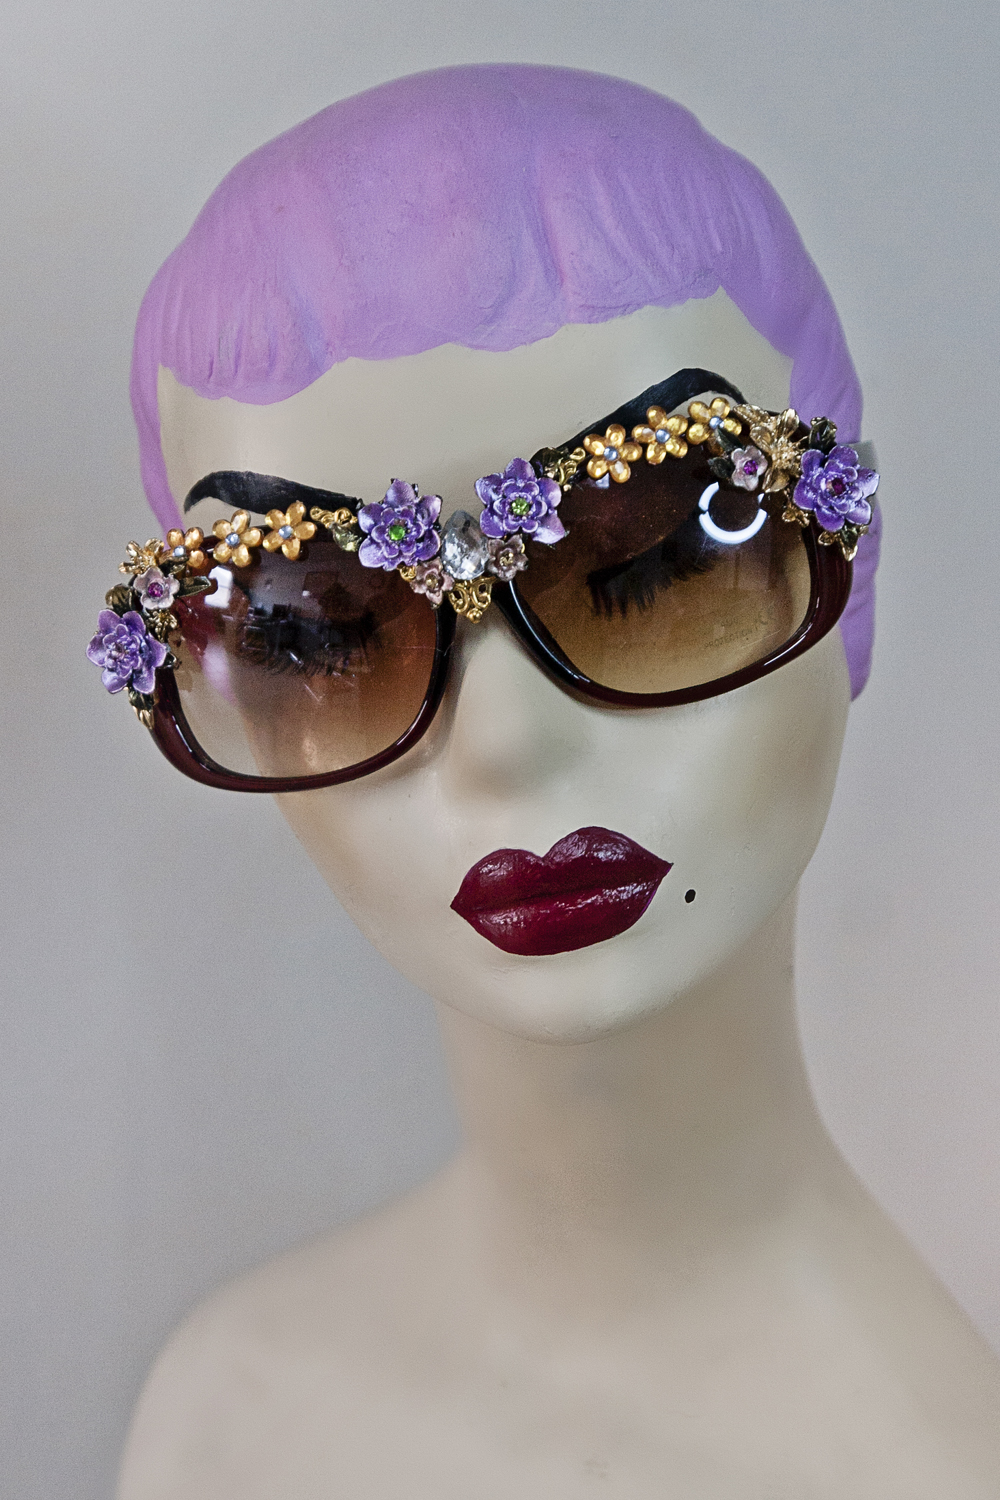 Blooming Sunnies - Purple & Gold